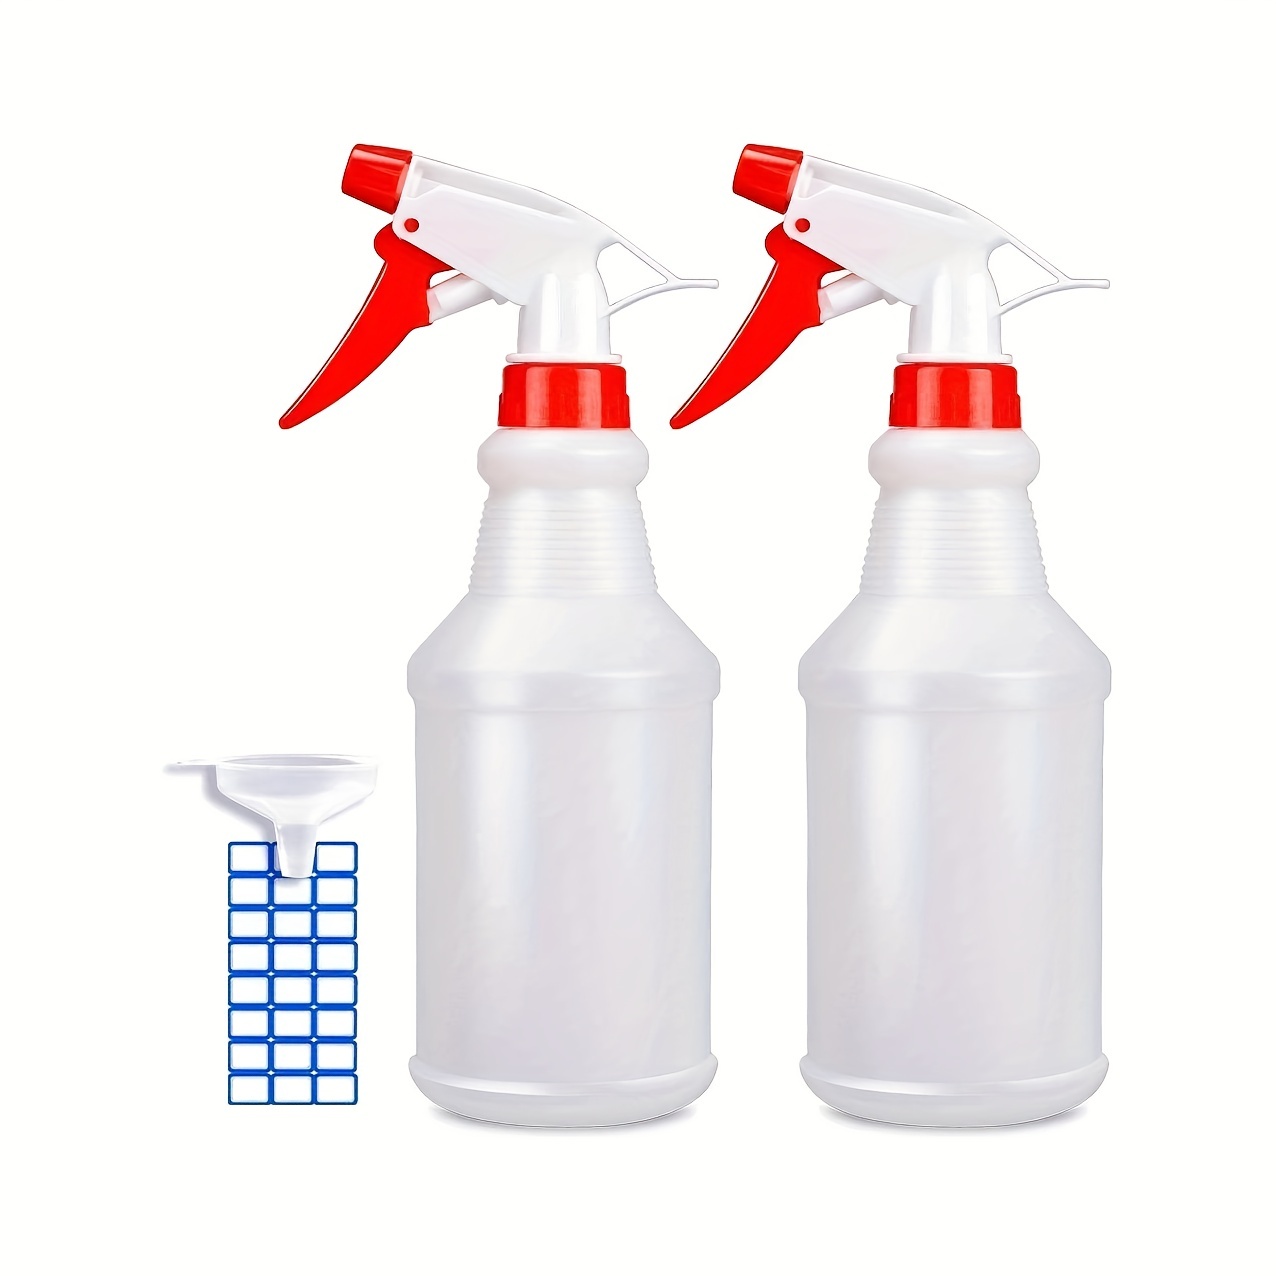 Plastic Spray Bottles Black For Cleaning Solutions, Heavy Duty